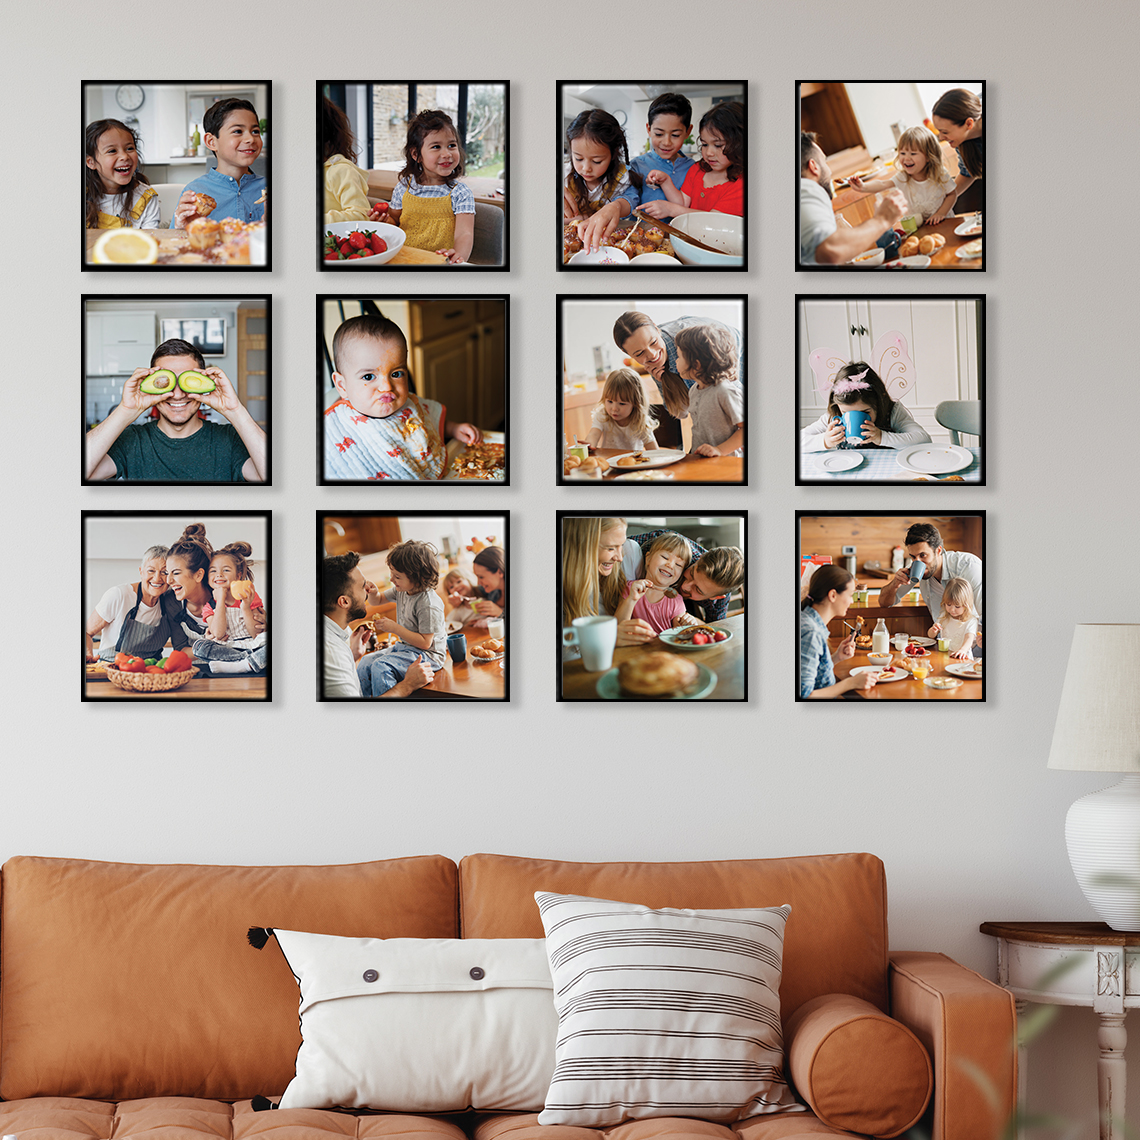 5 Ways to Hang Pictures without Damaging Your Walls - Artiv Photo Tiles by  Phototile